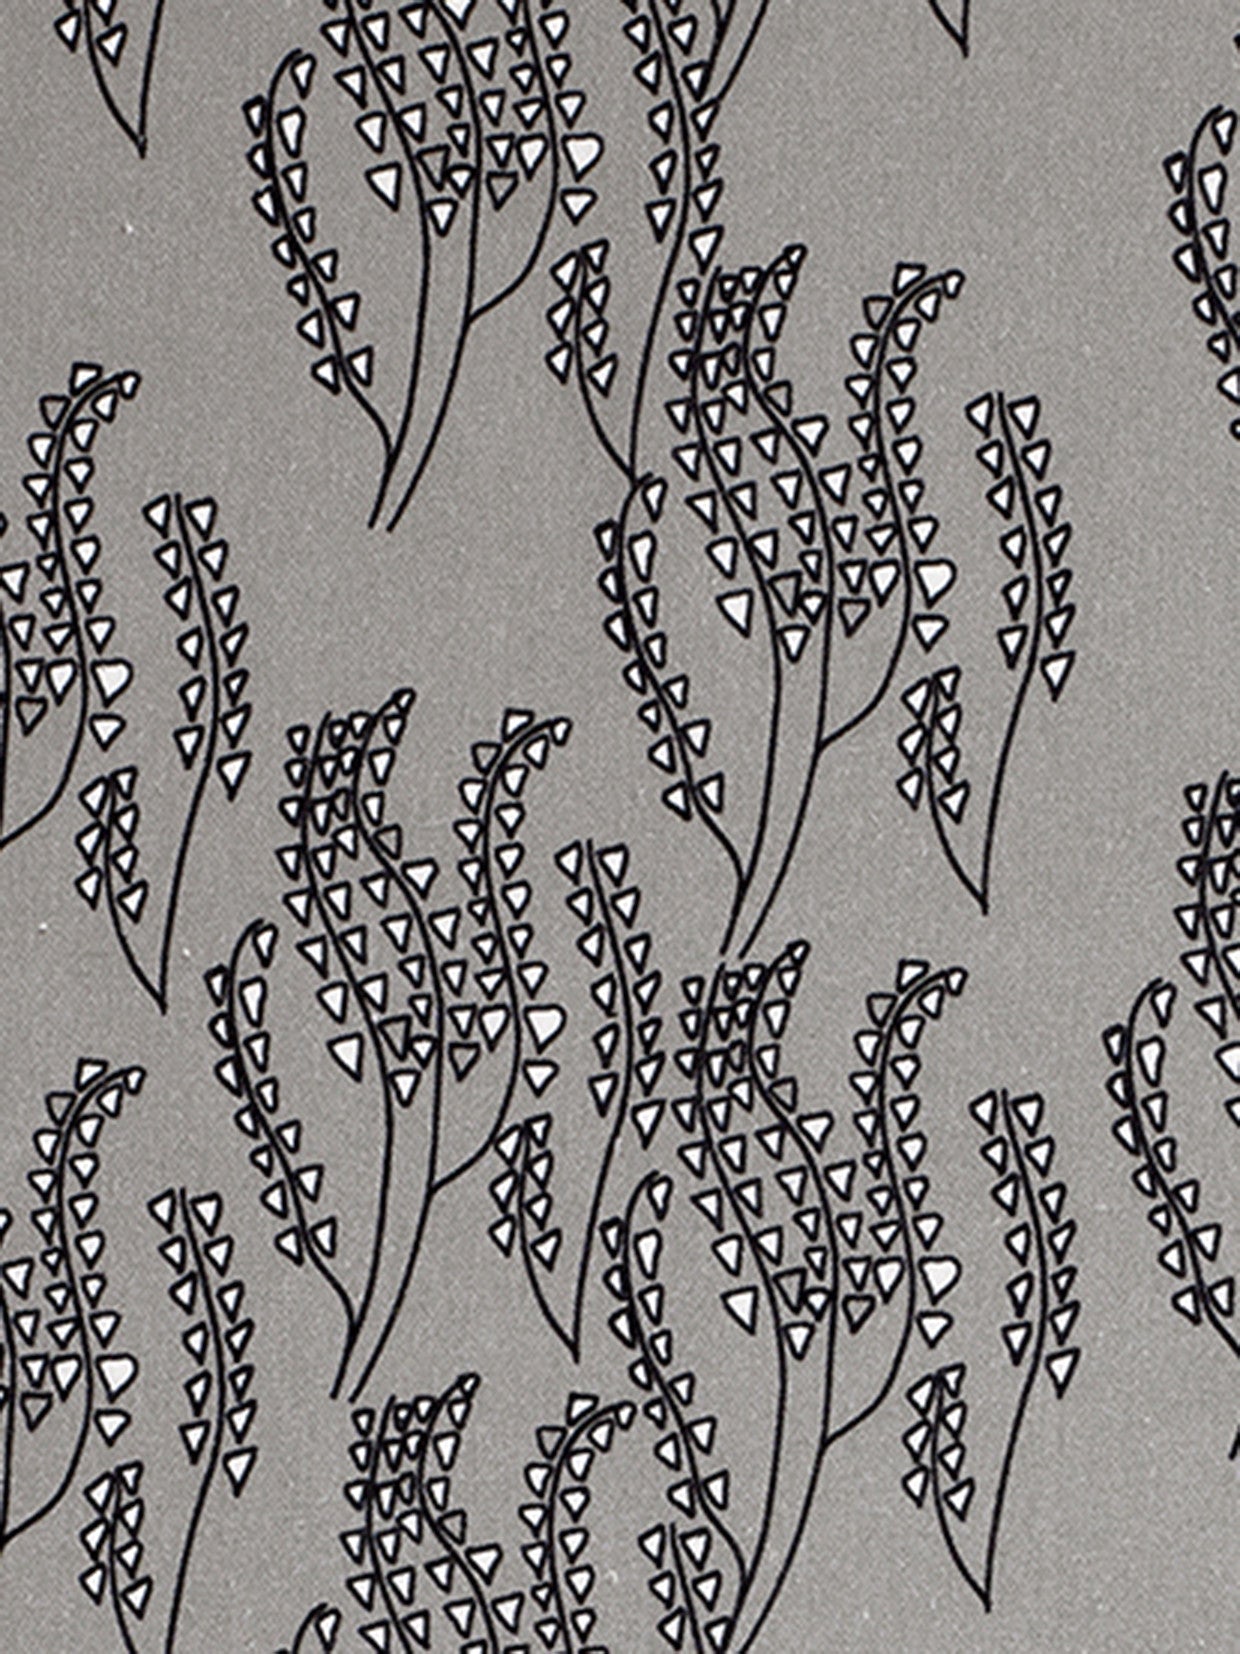 Maricopa Graphic Floral Pattern Cotton Linen Home Decor Fabric by the yard or by the meter for curtains, blinds, upholstery in Light Dove Grey - Black ships from Canada worldwide (USA)